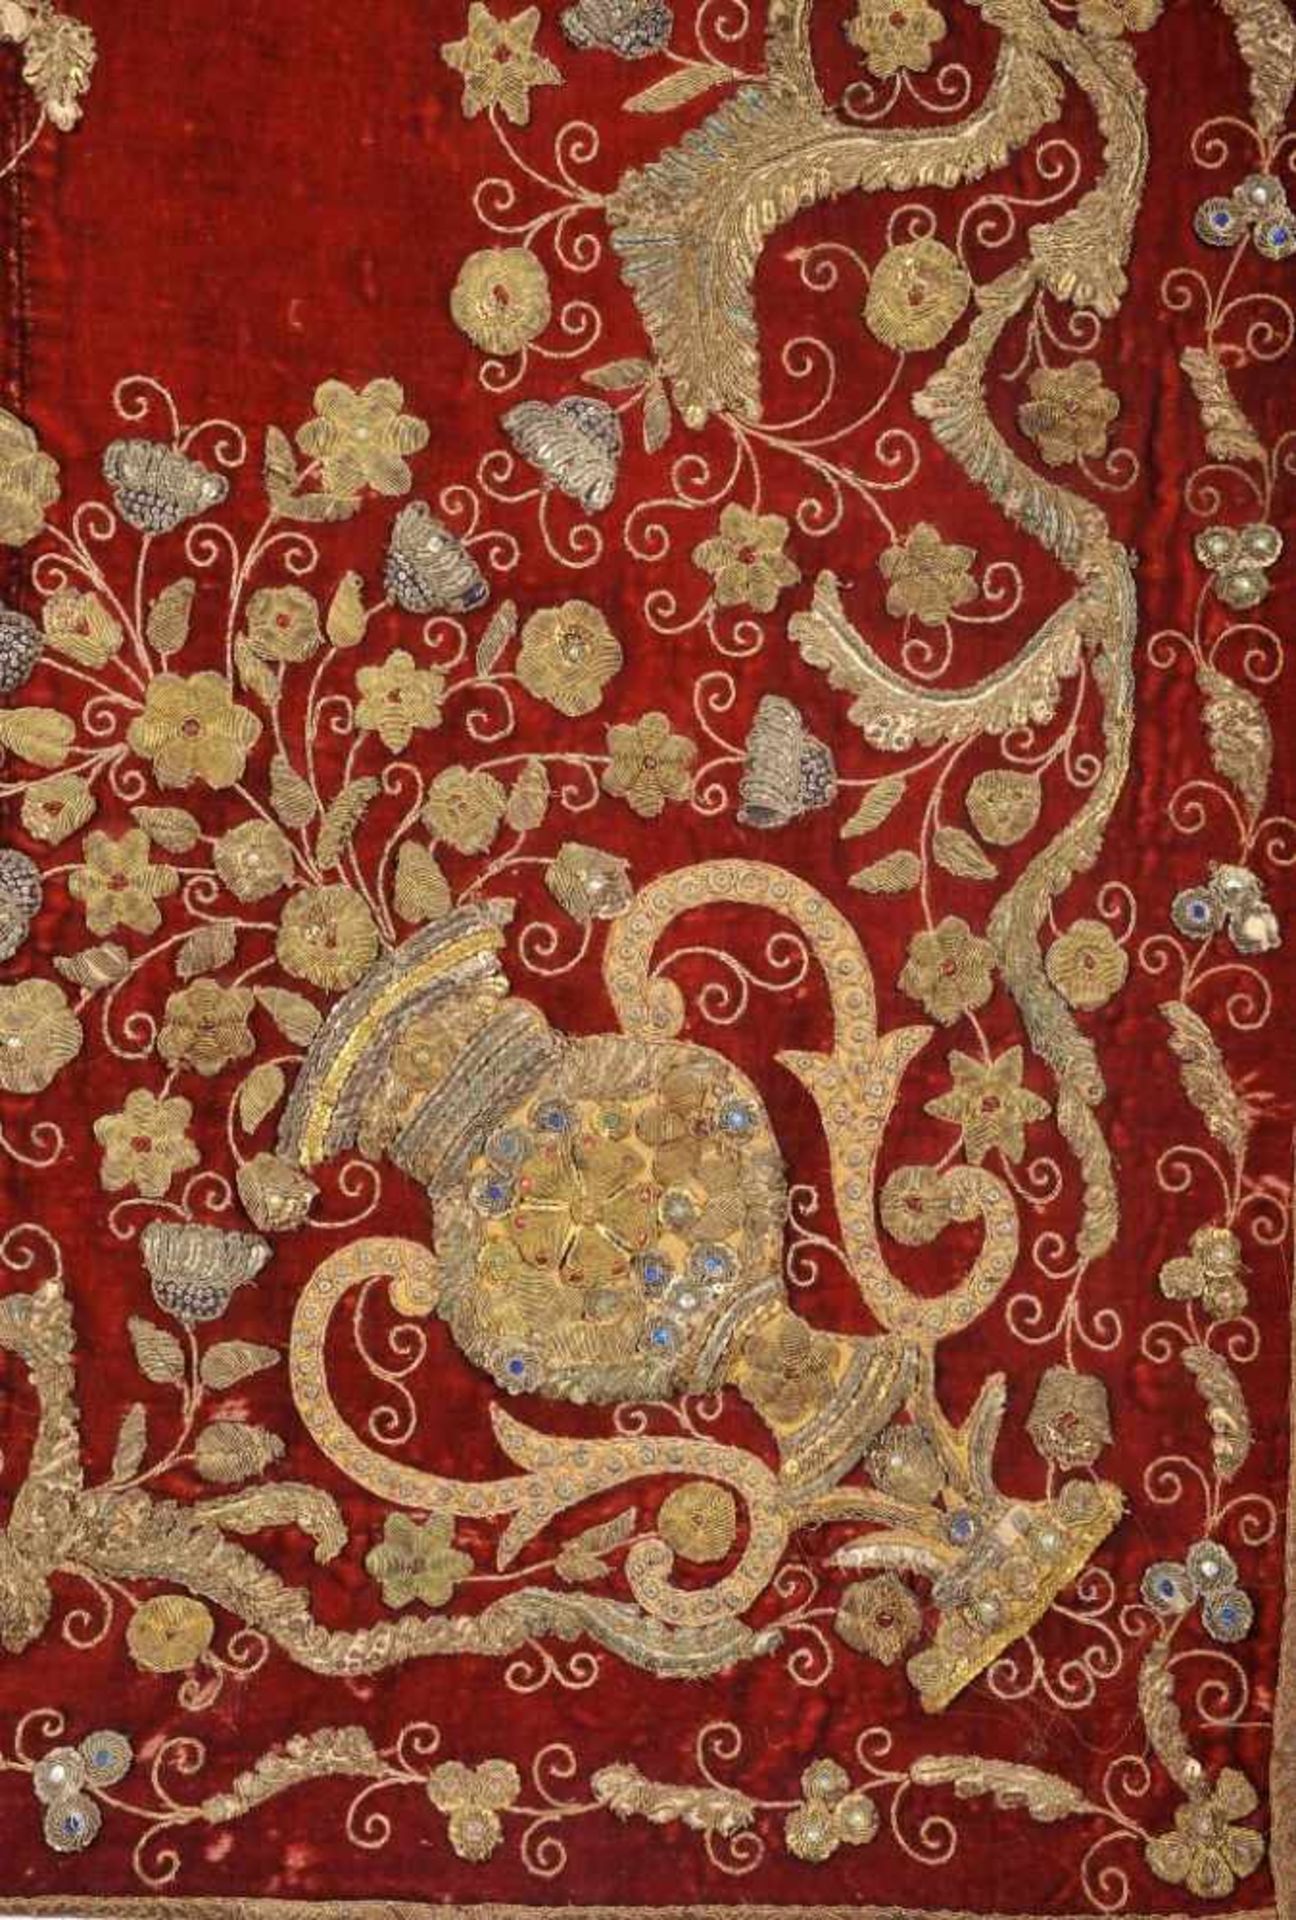 A Drape ClothA Drape Cloth, red velvet embroidered with gilt and silver metallic thread "Amphorae - Image 3 of 3